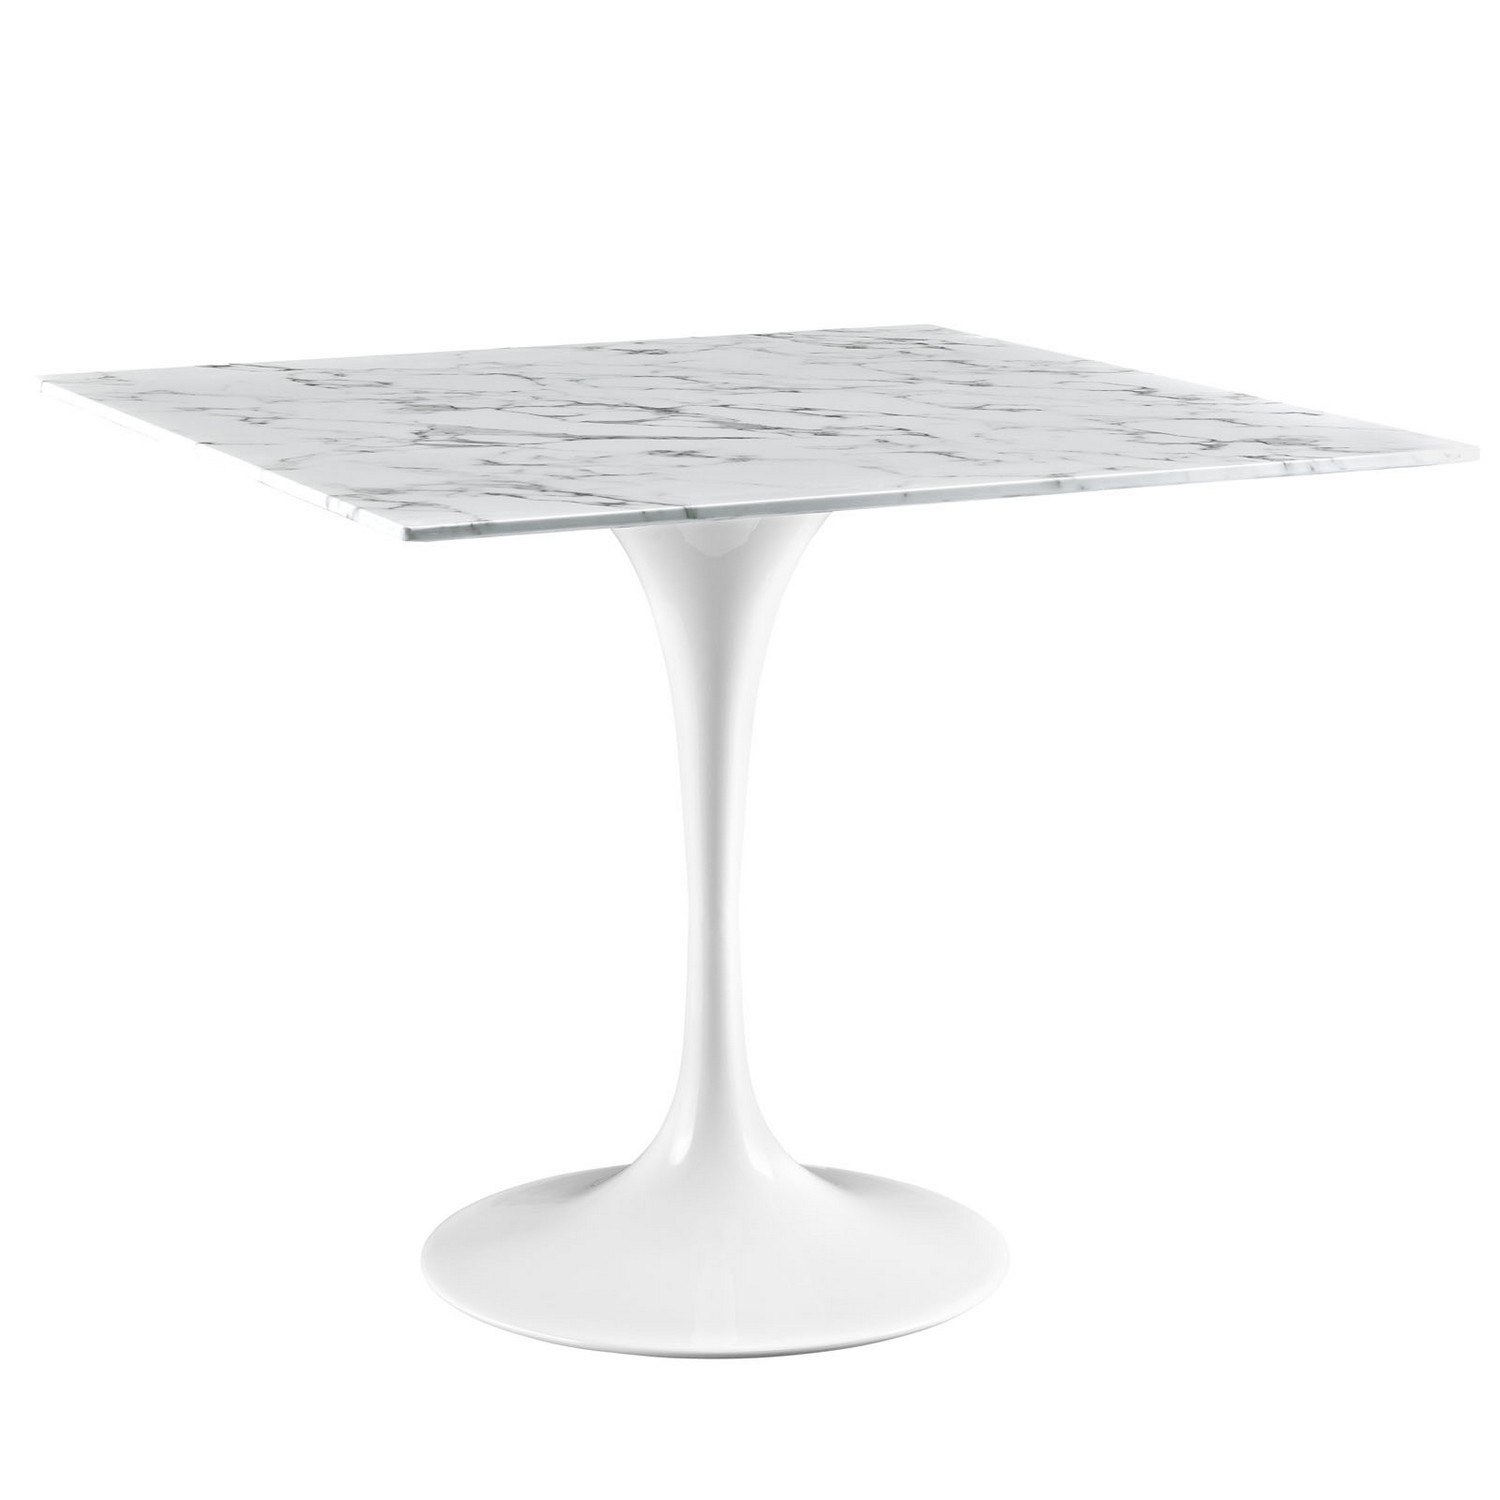 Modway Lippa 36 Marble Dining Table - White